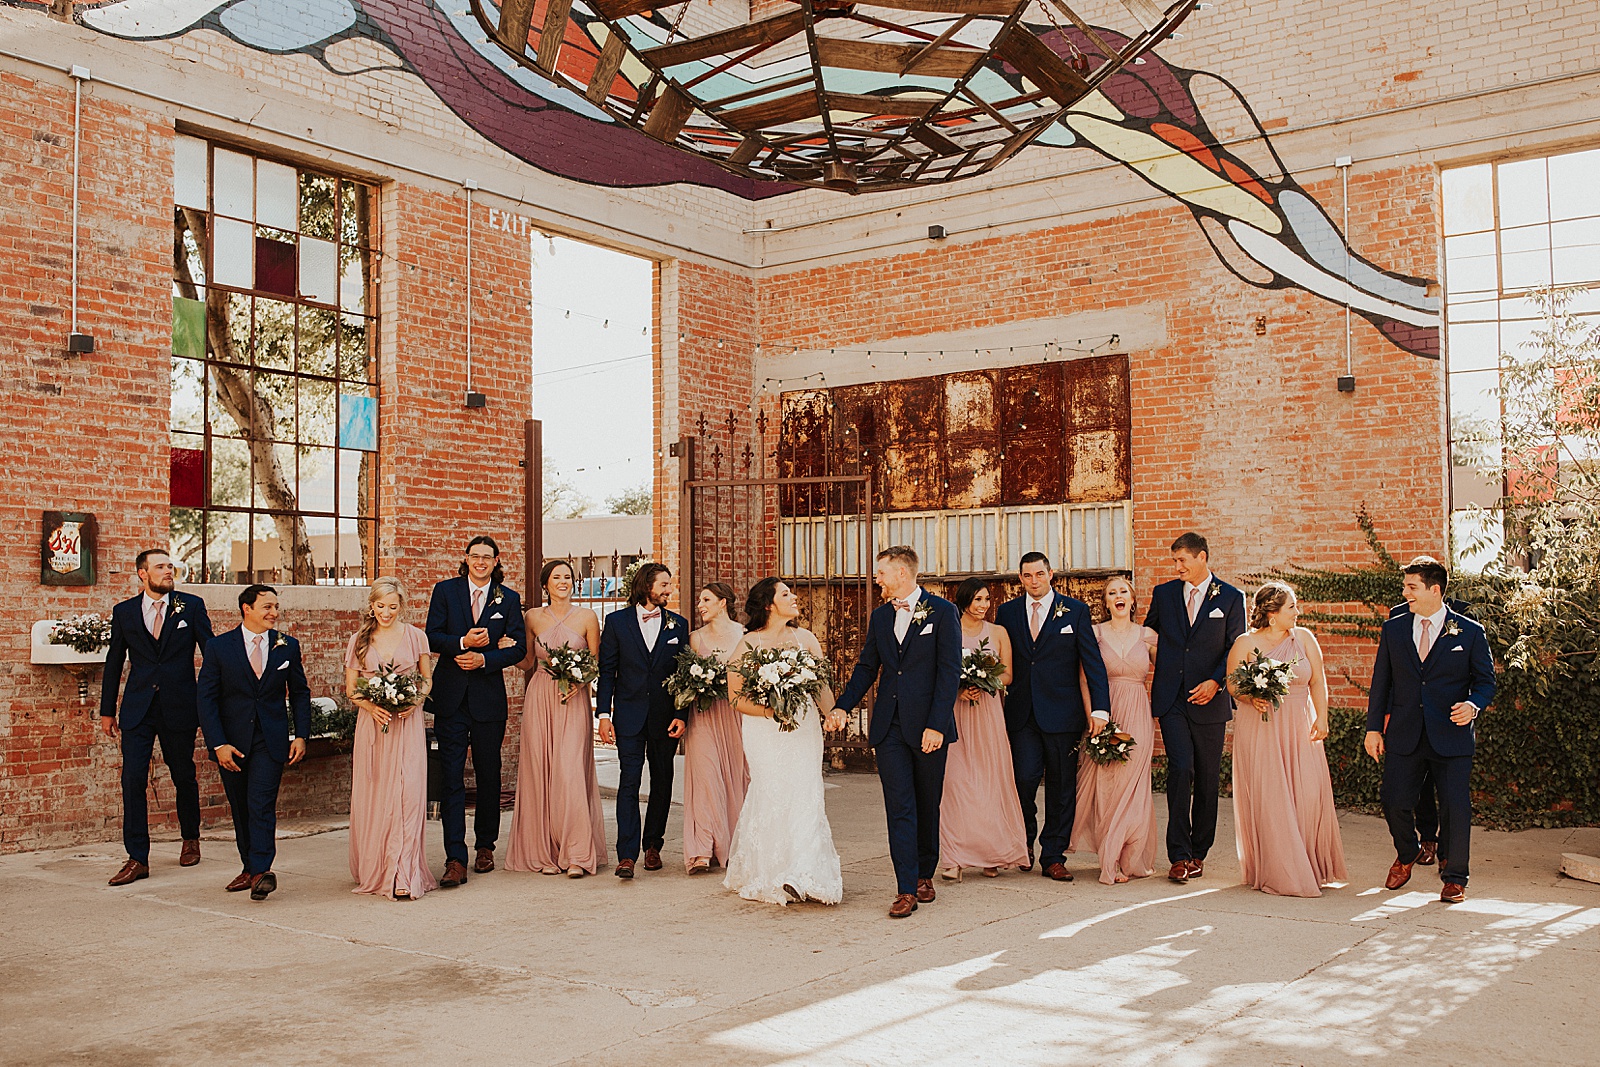 A bridal party wedding photo at the Soda District Courtyard in Abilene.